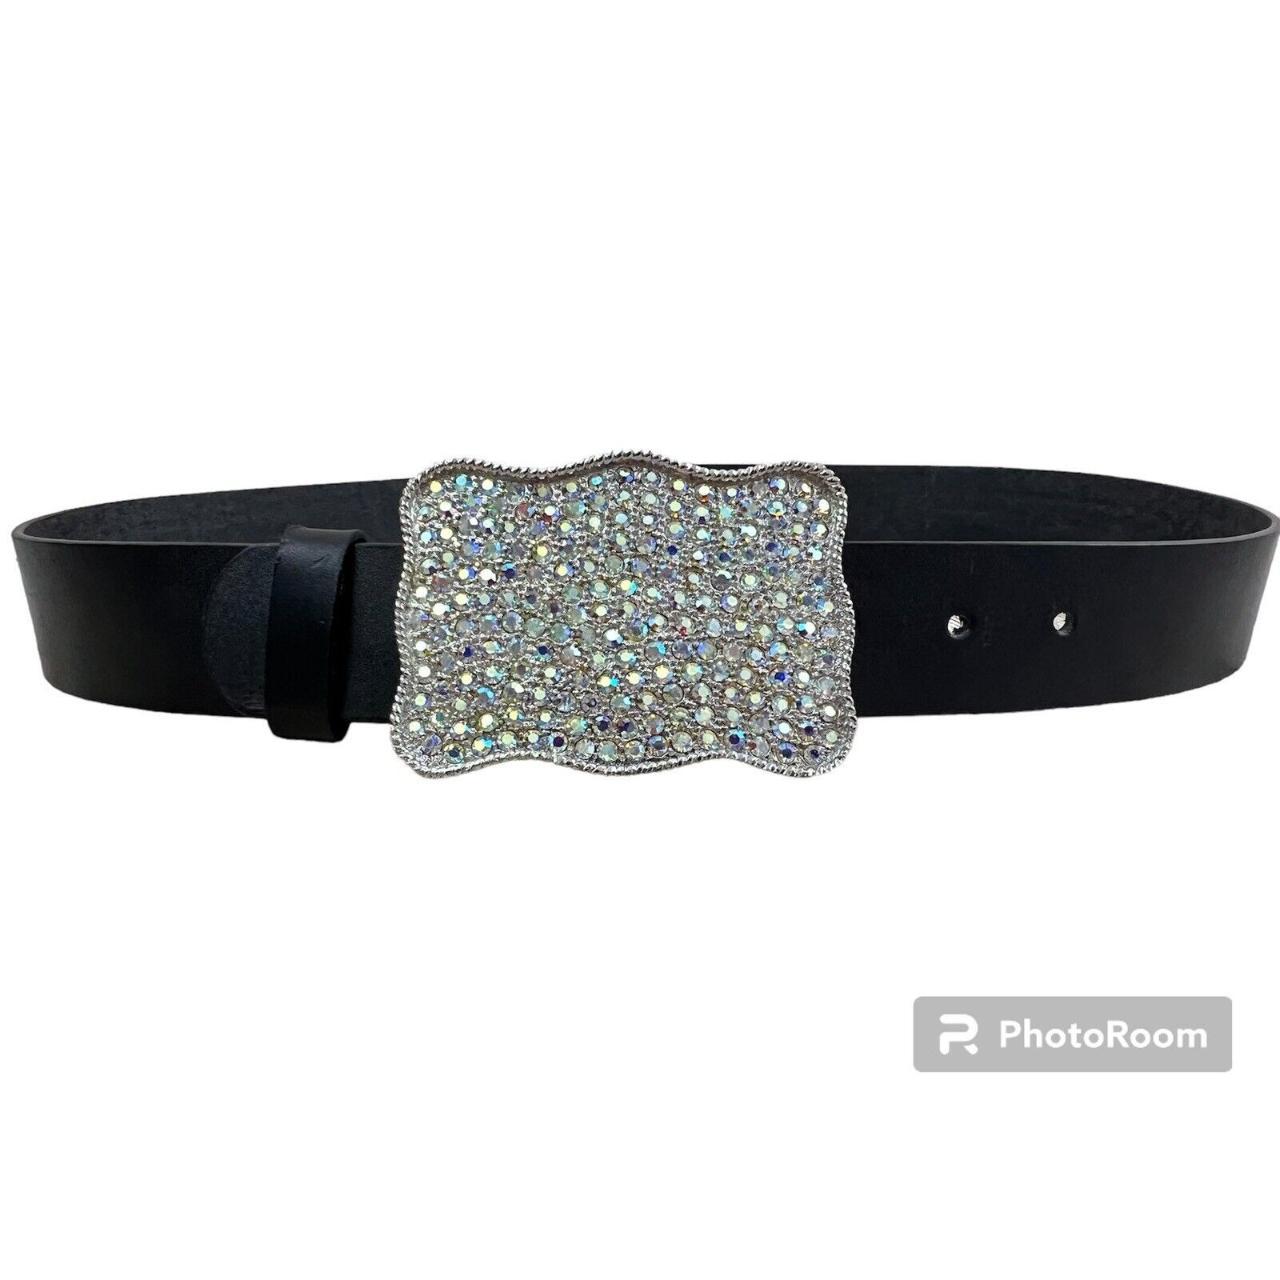 Black belt with rhinestone and silver rectangle buckle